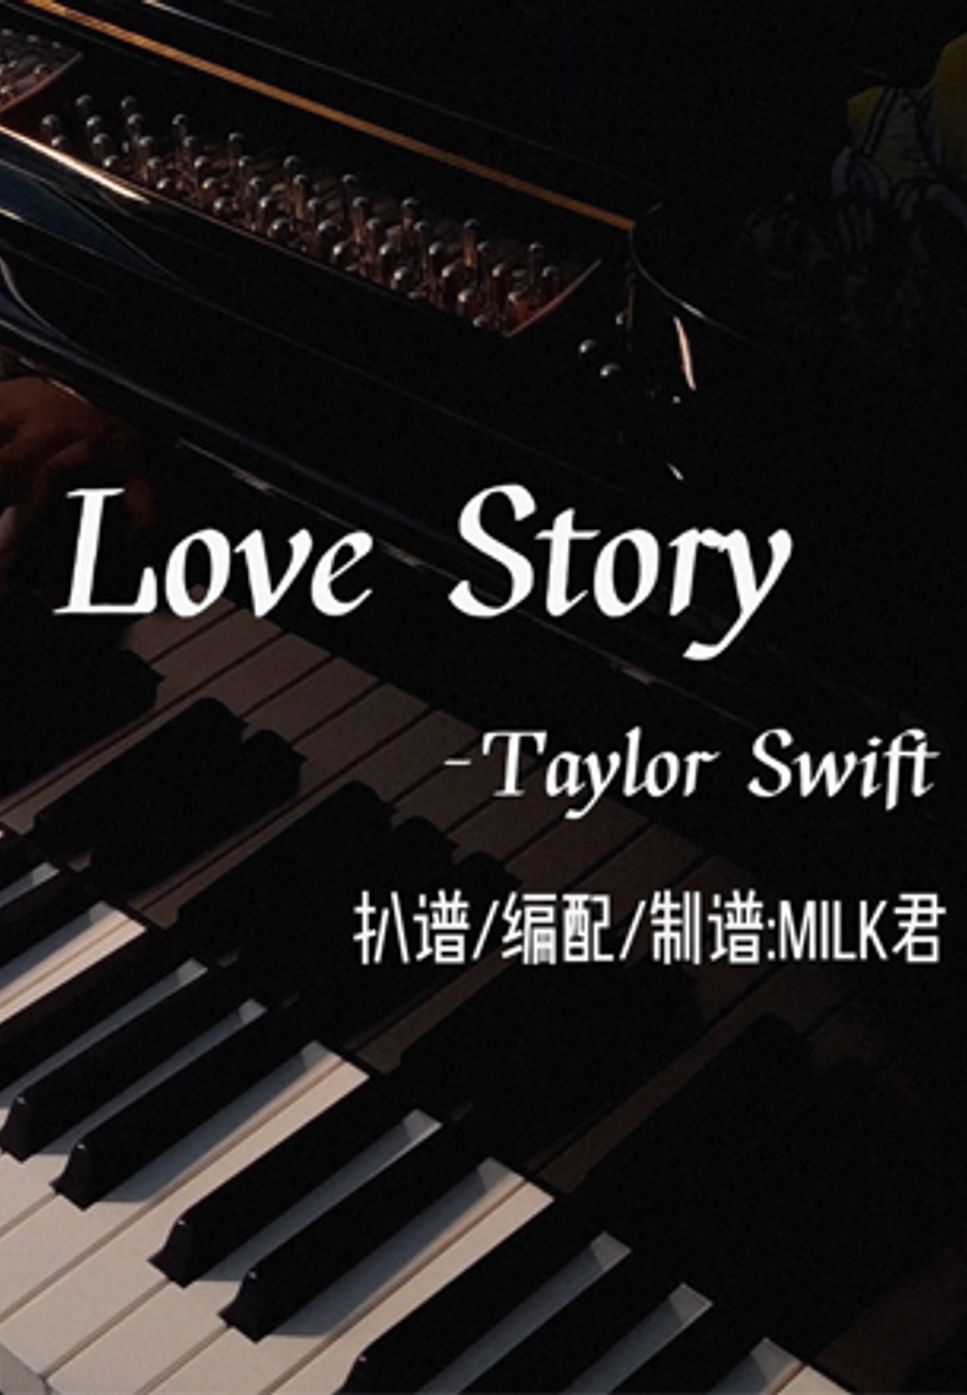 Taylor Swift - Love Story (片段) by milk君